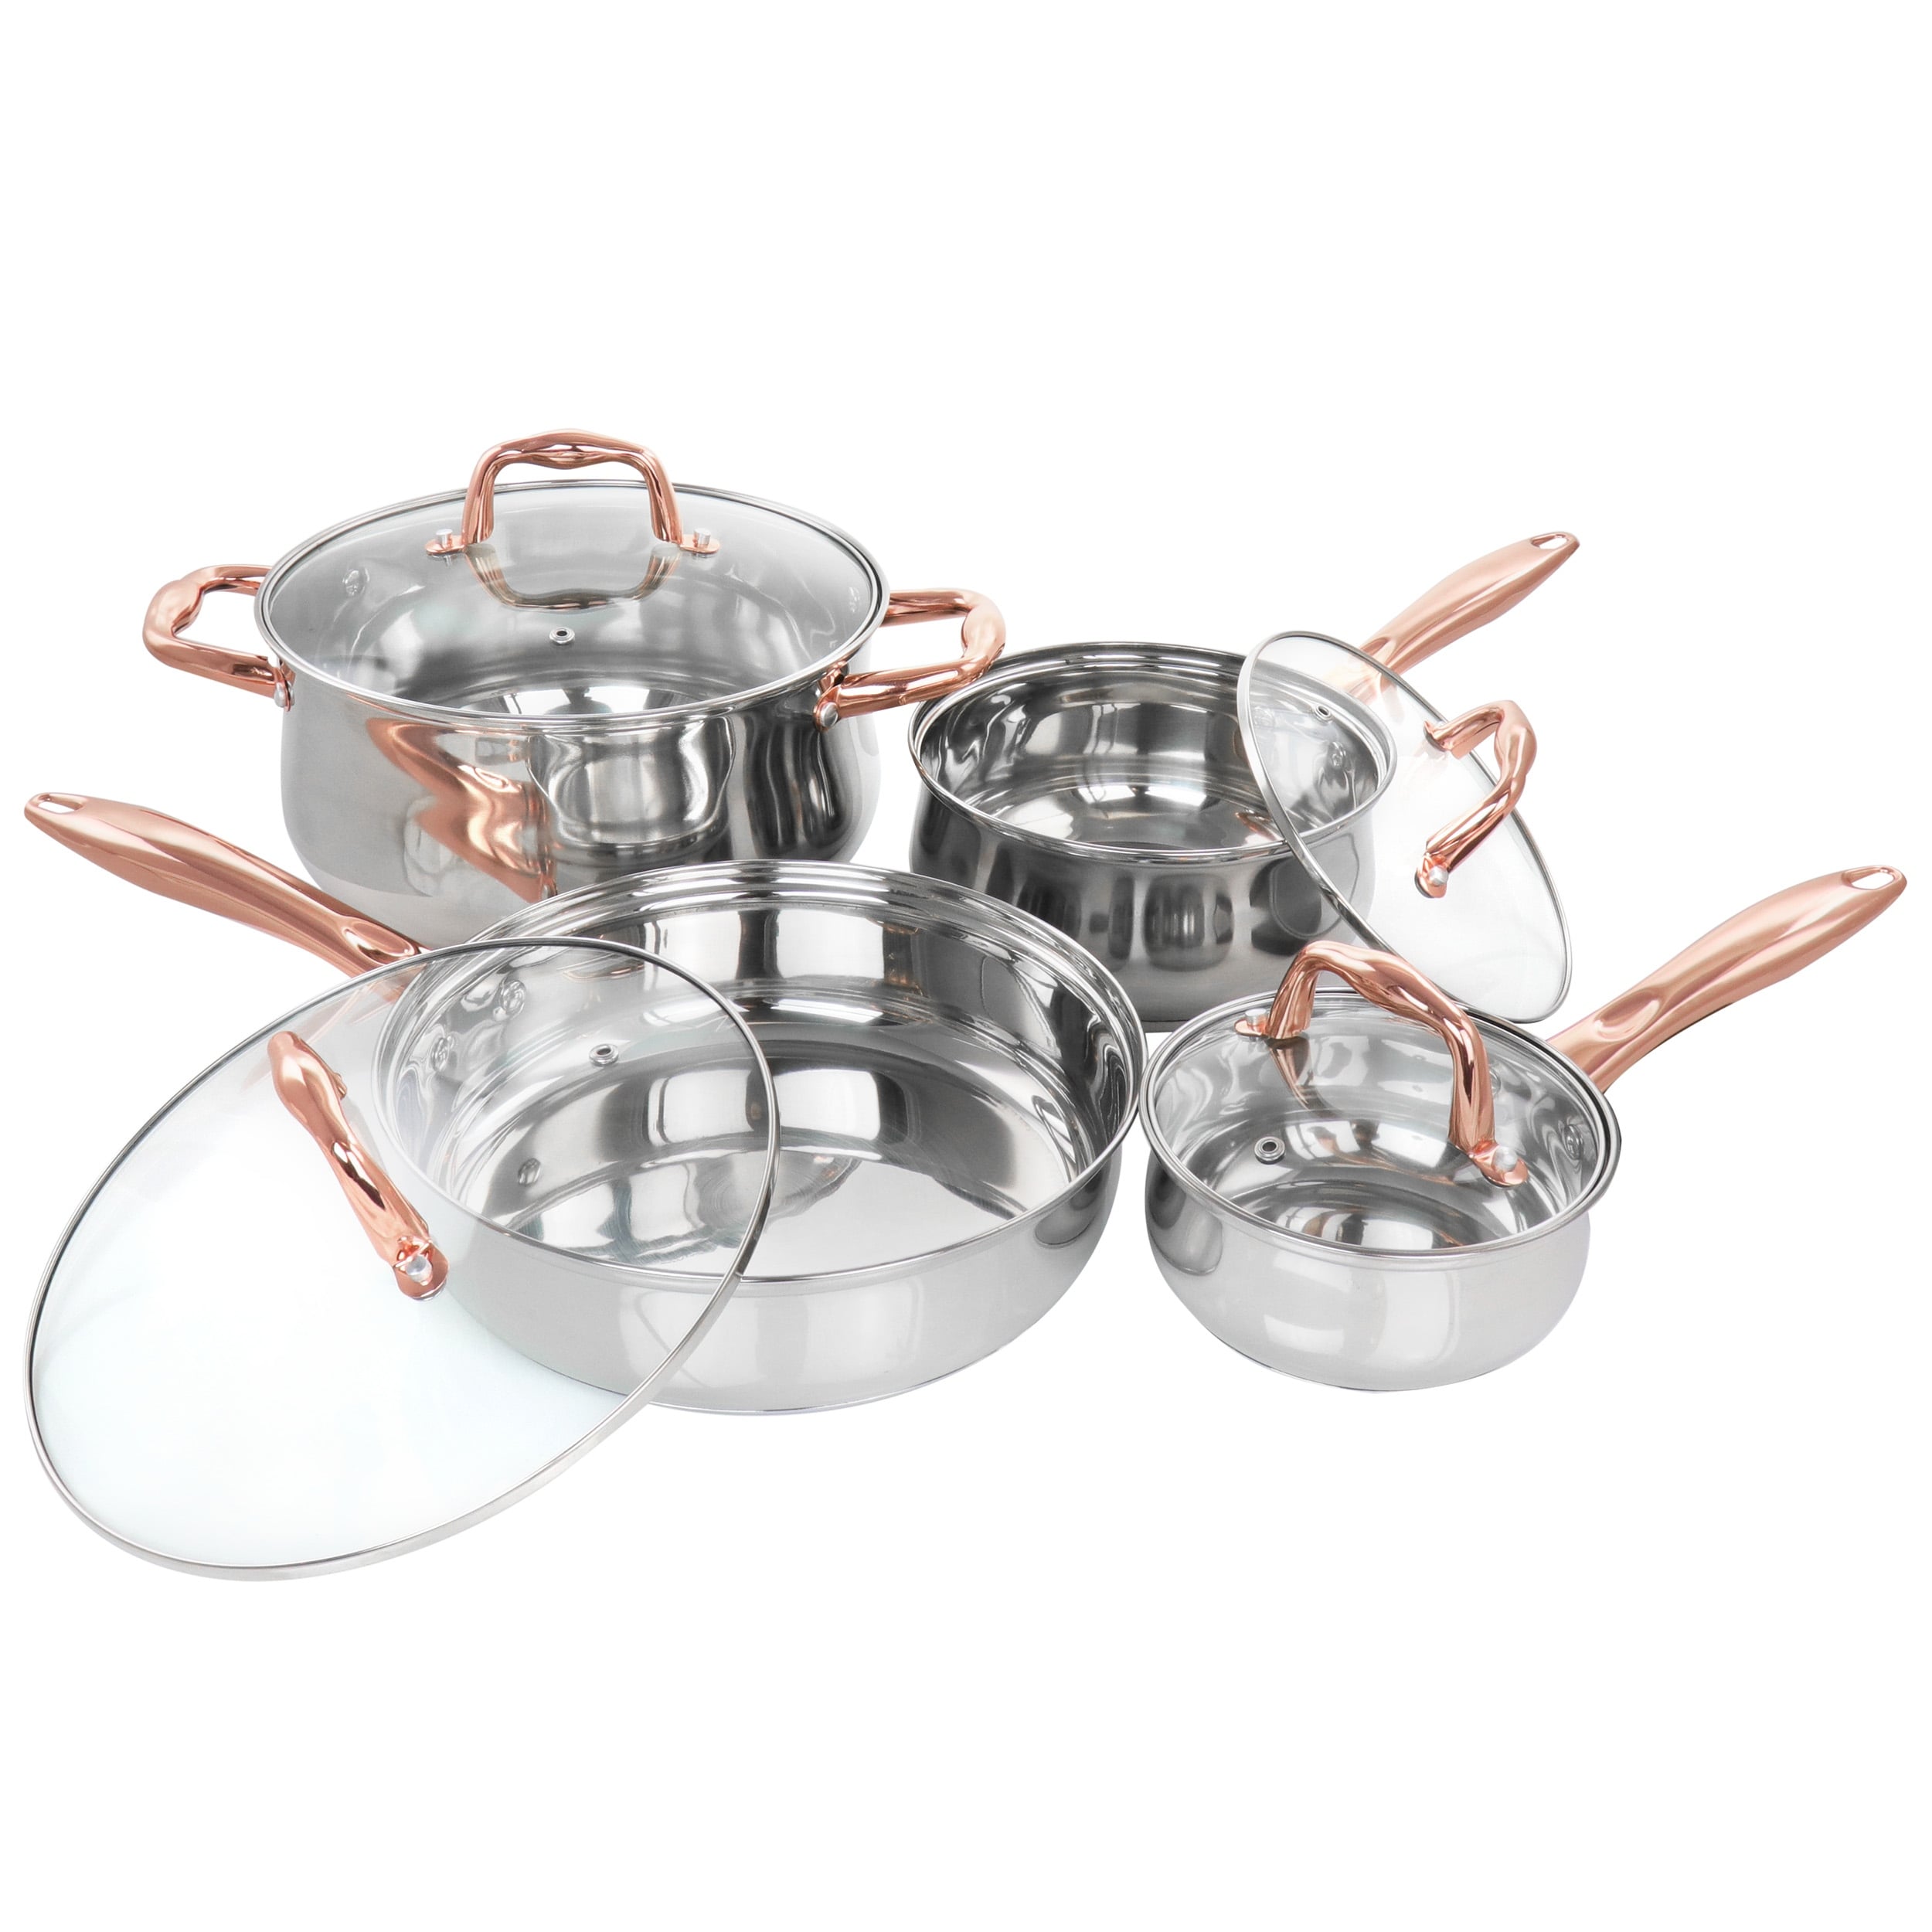 https://ak1.ostkcdn.com/images/products/is/images/direct/3273a73cb8154c7d0da2a44e7b109d7965a08ba6/Gibson-Home-Bransonville-8-Piece-Stainless-Steel-Cookware-Set-in-Chrome-and-Bronze.jpg